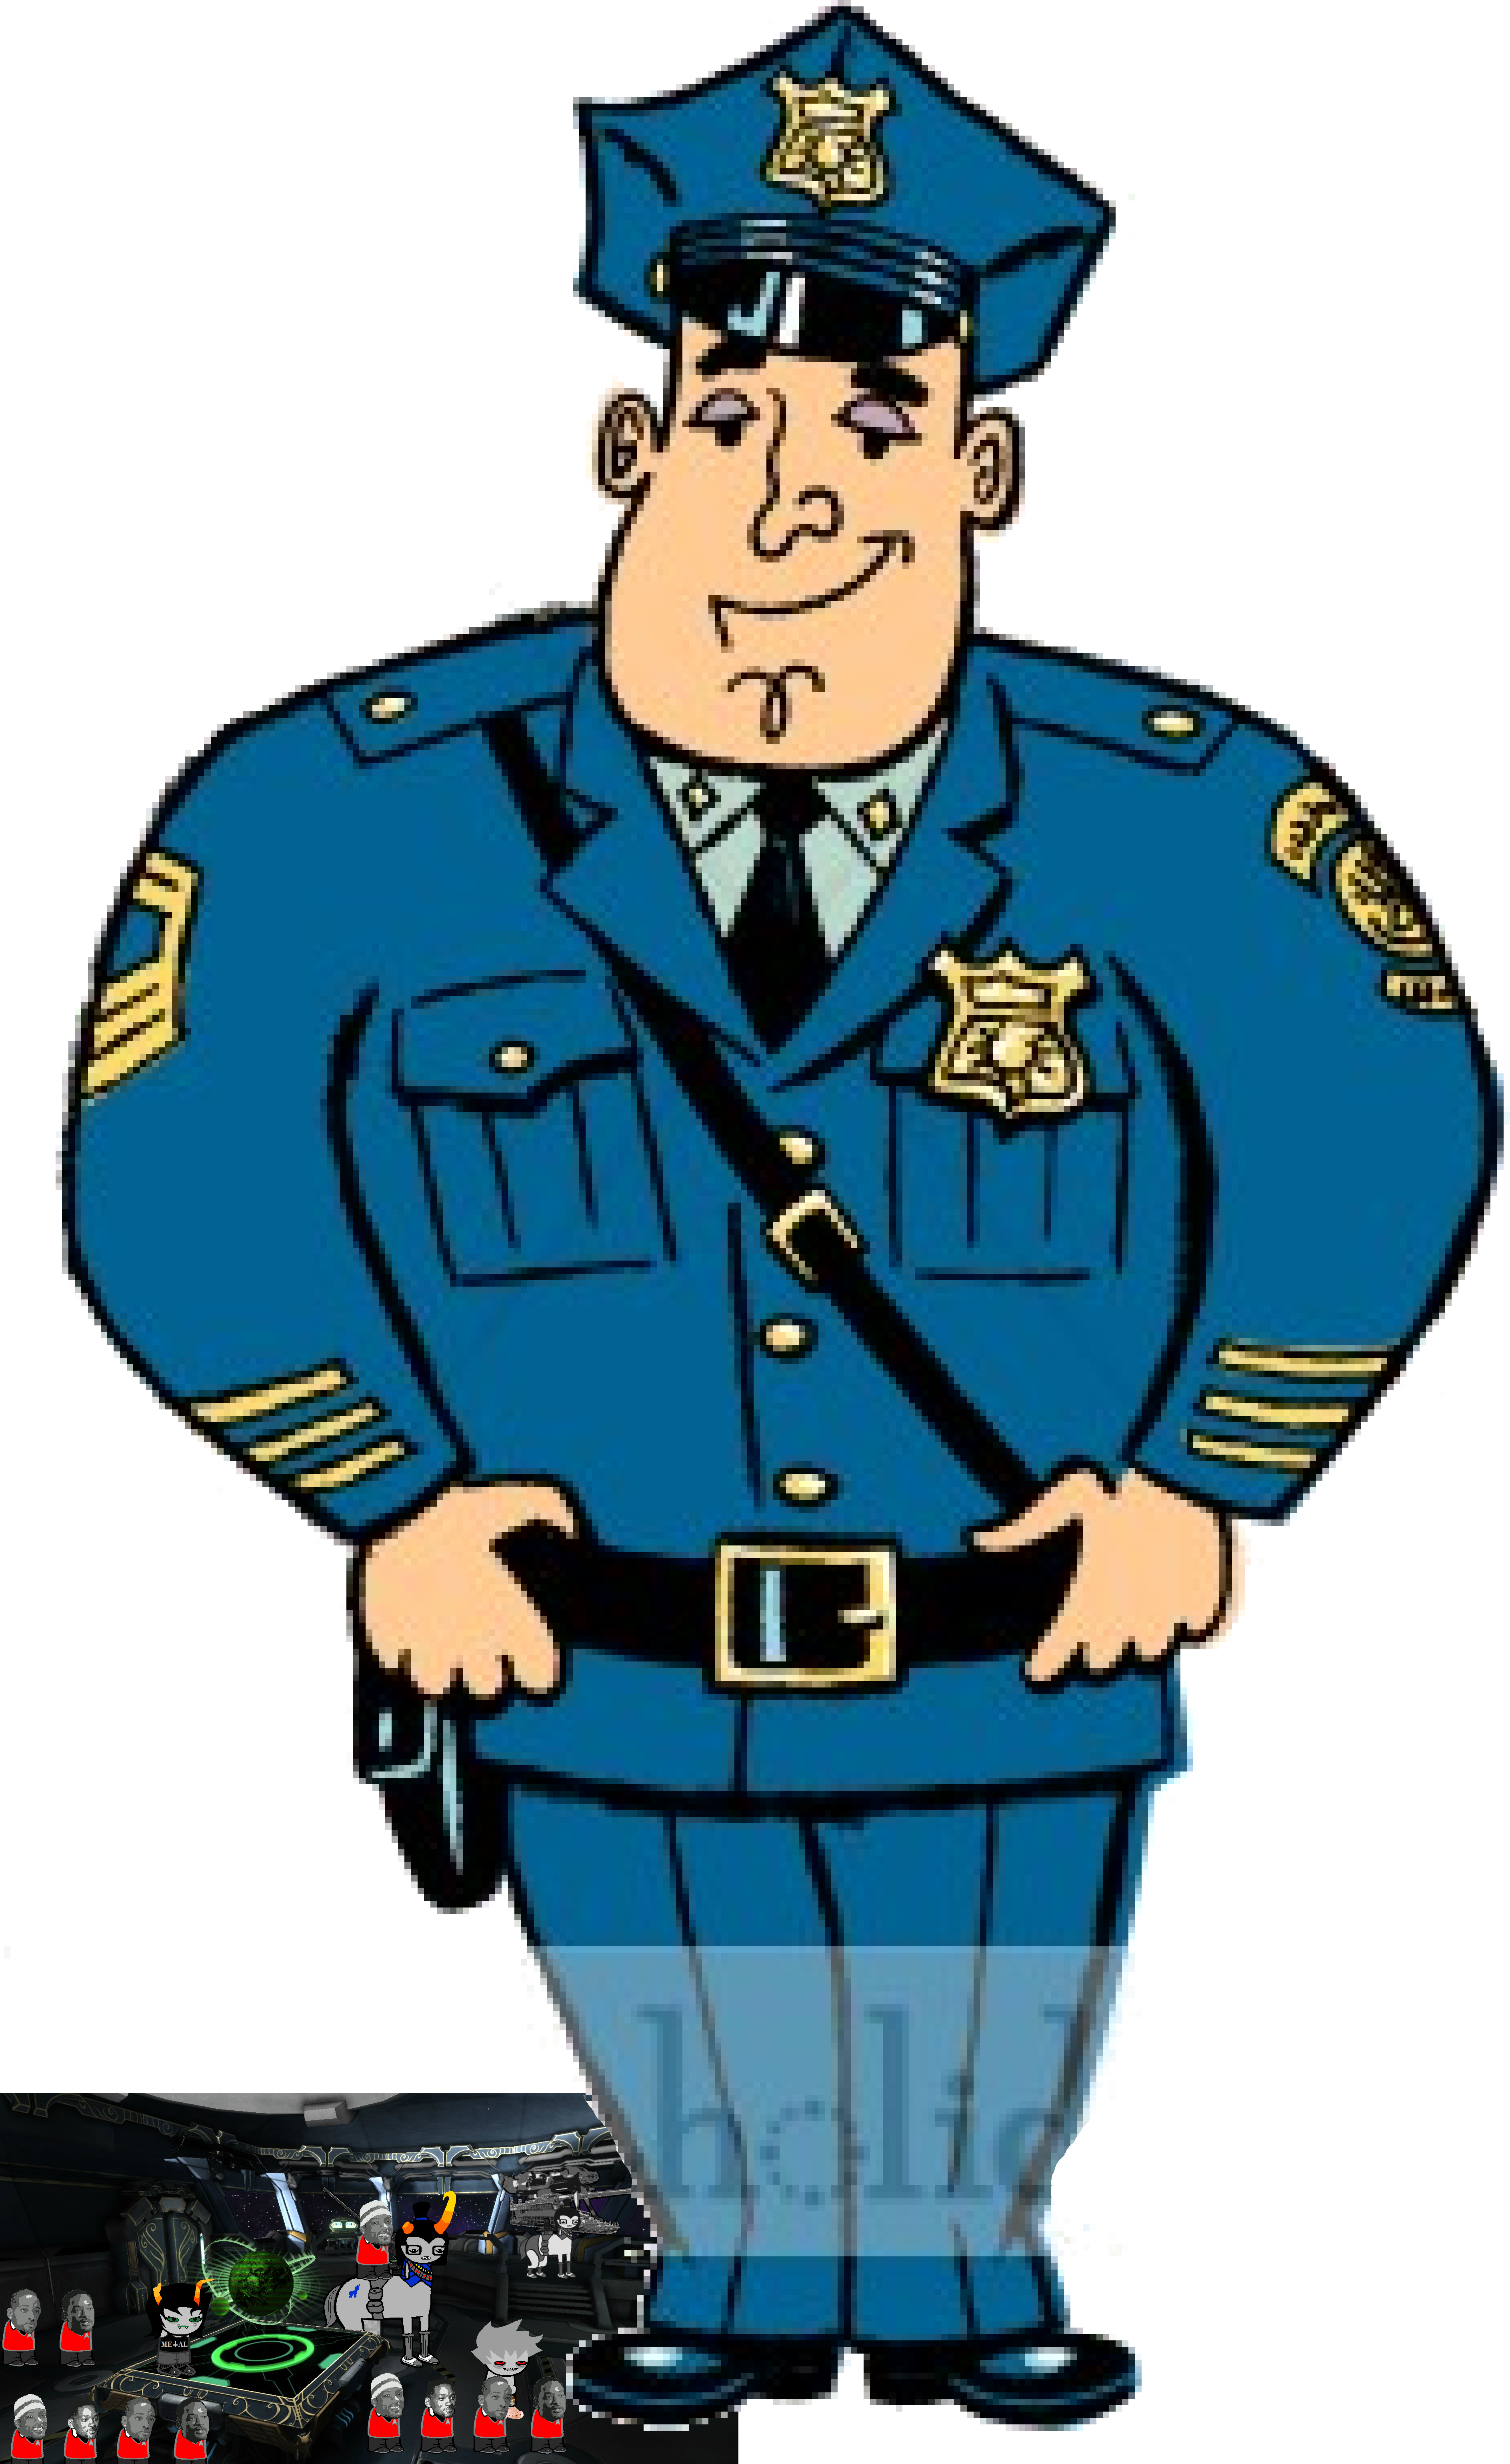 Policeman Clipart Bimbo 798t - Clipart Image Of Policeman - Png 